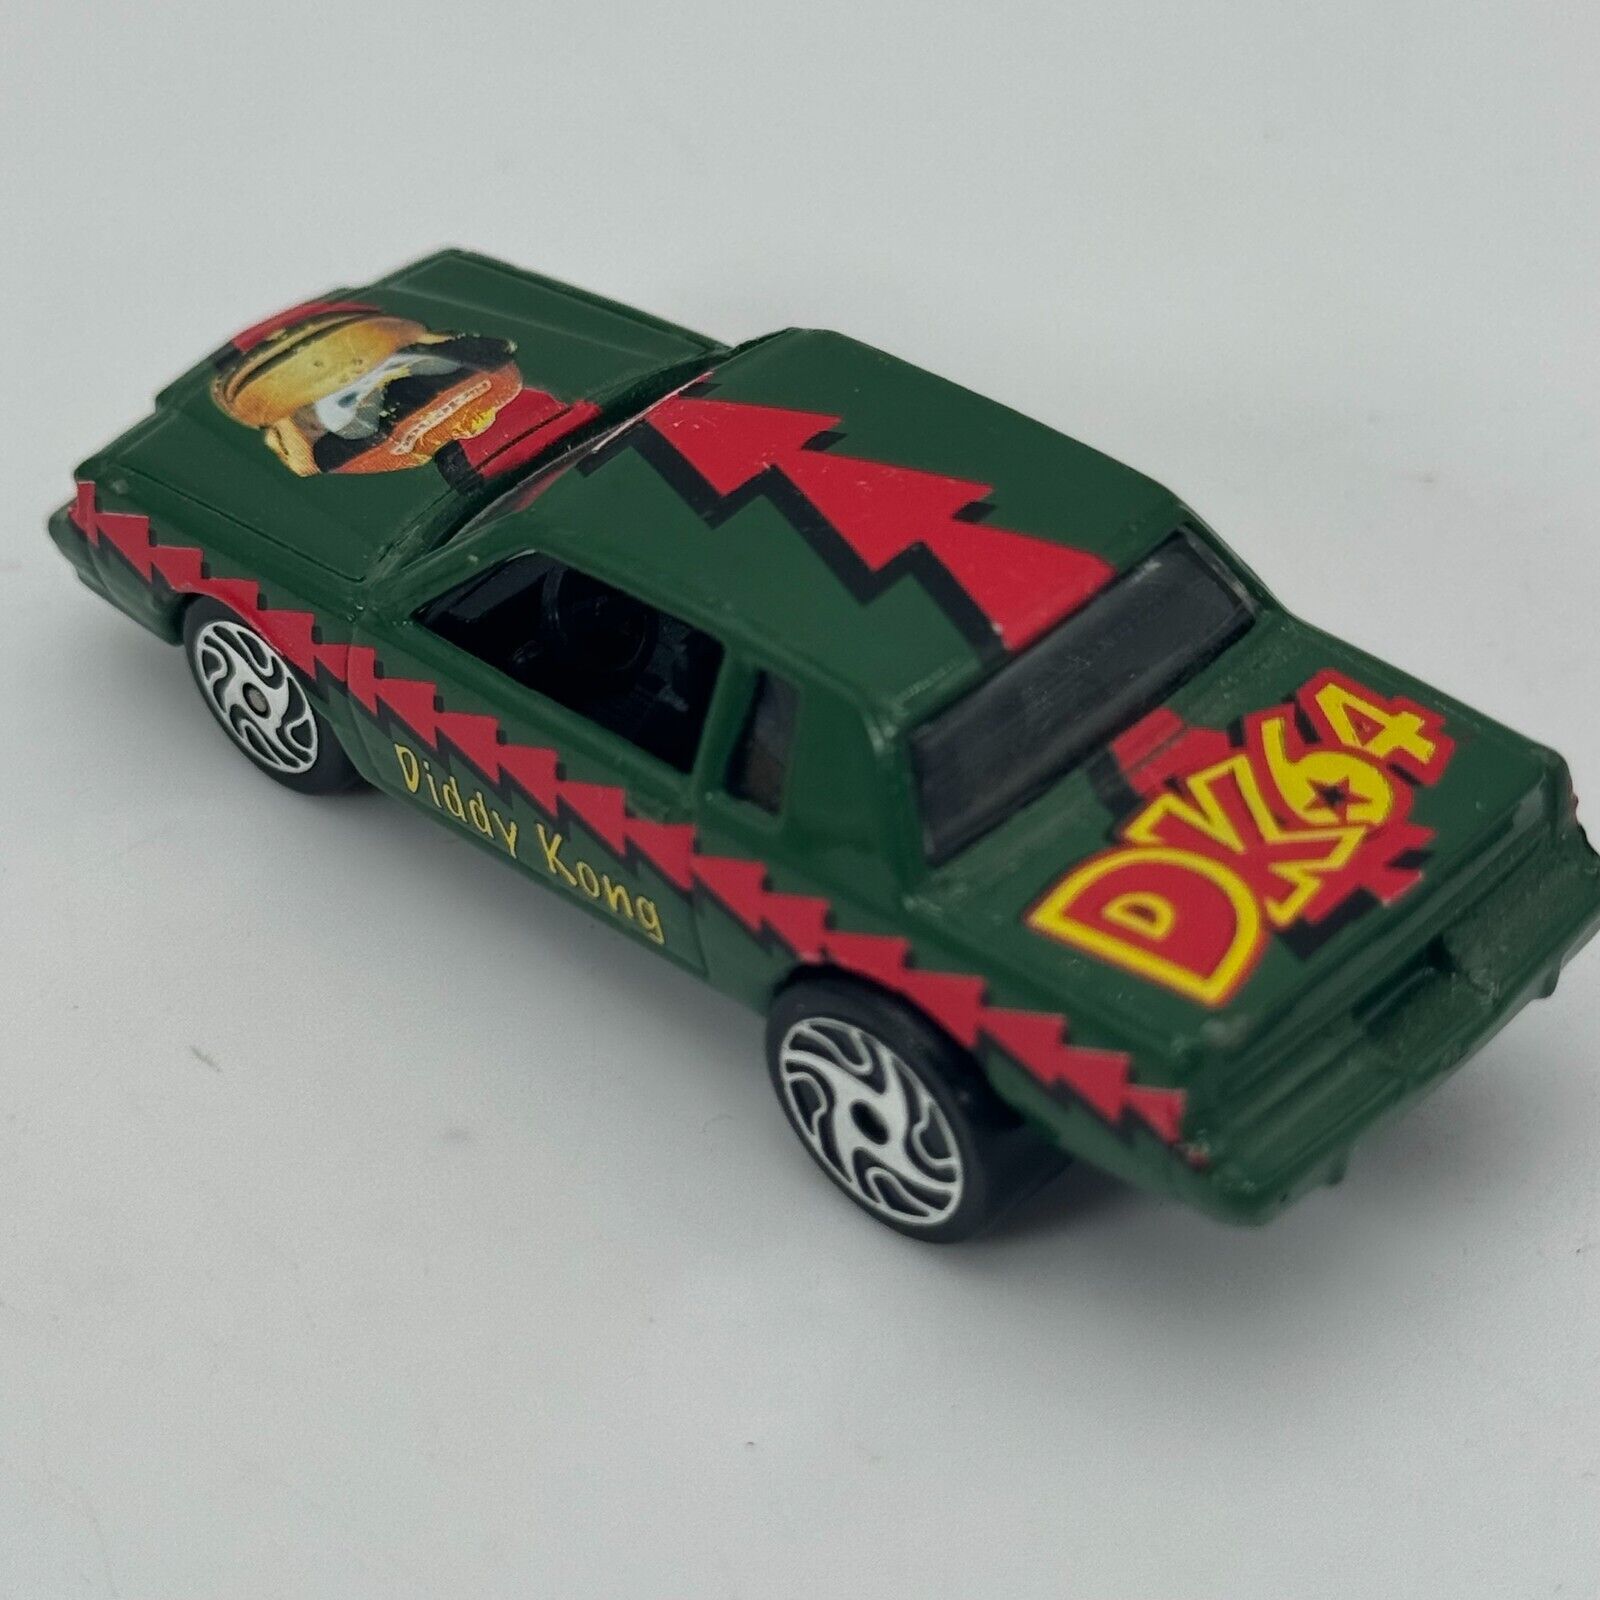 Racing Champions DK64 Diddy Buick Lanky Chevy Collectible Car Nintendo 2pc